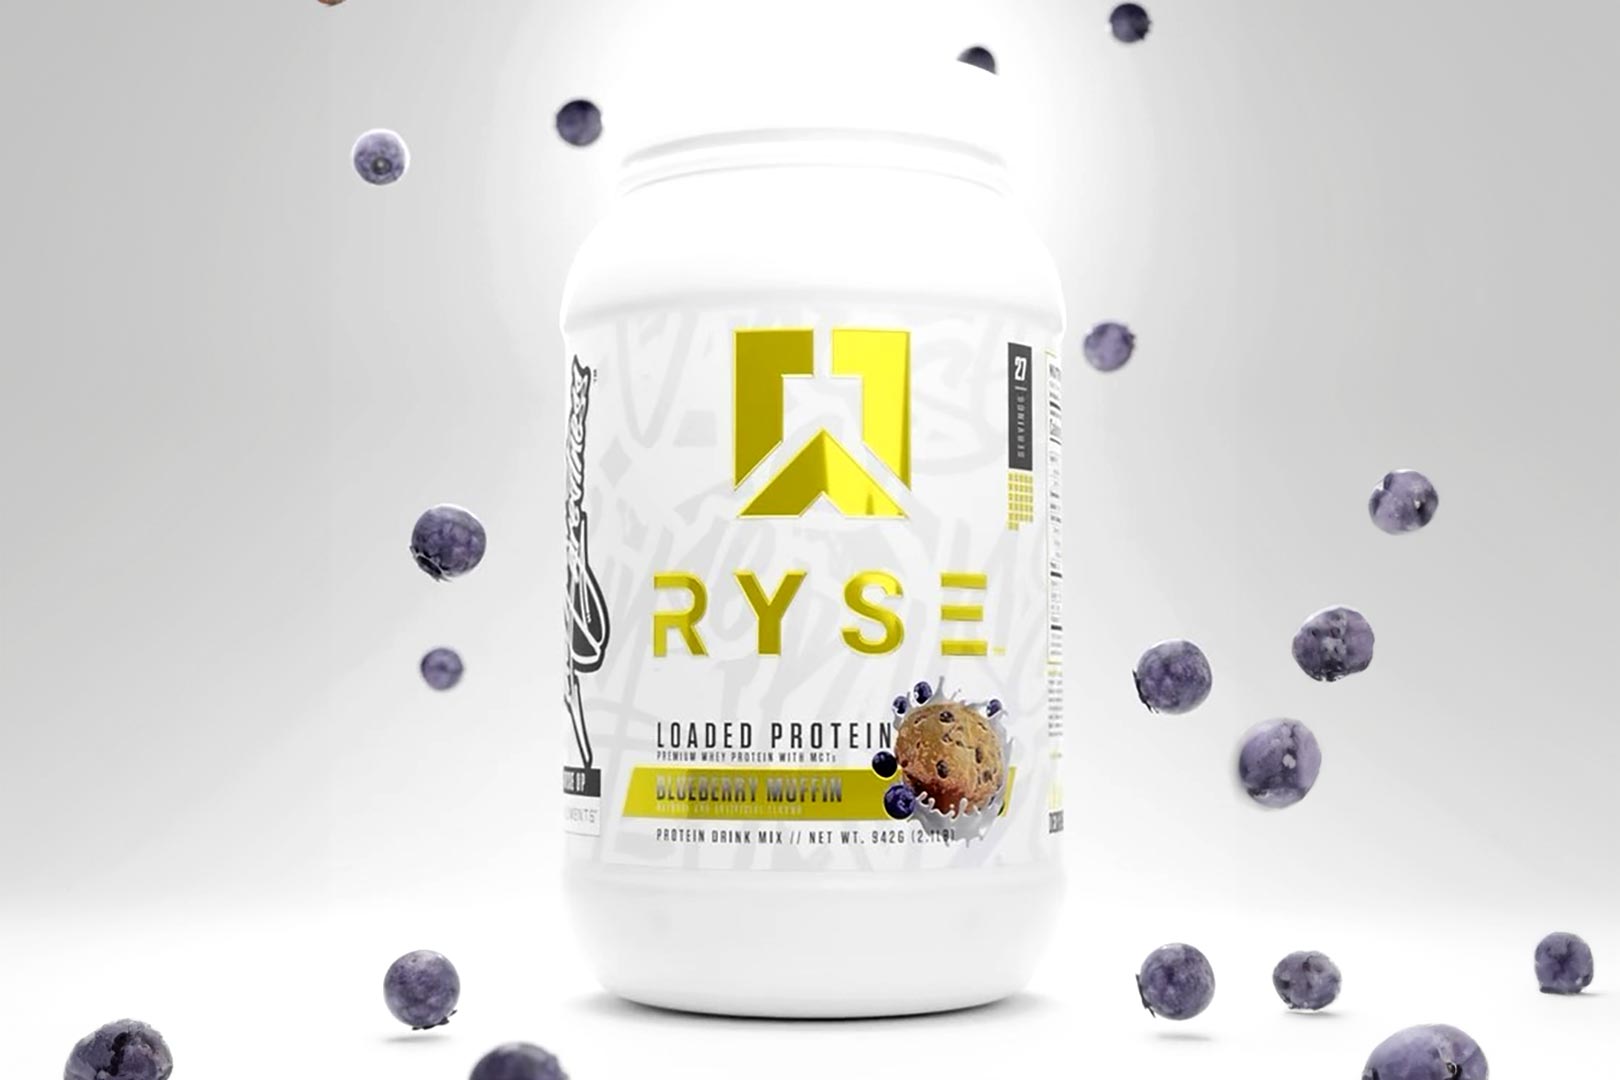 https://www.stack3d.com/wp-content/uploads/2023/07/ryse-blueberry-muffin-loaded-protein.jpg